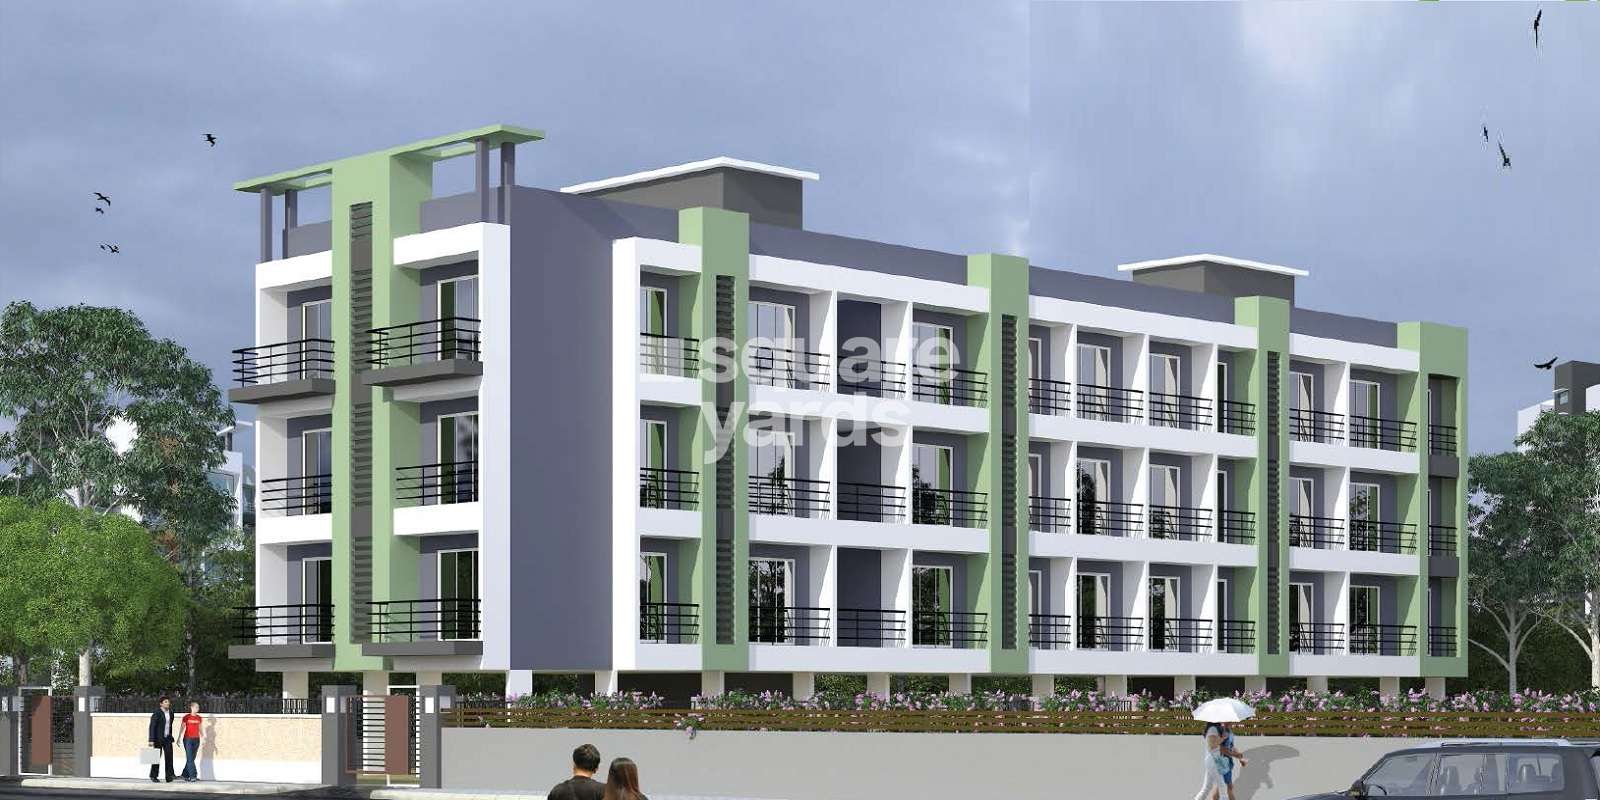 Riddhi Siddhi Apartments Karjat Cover Image